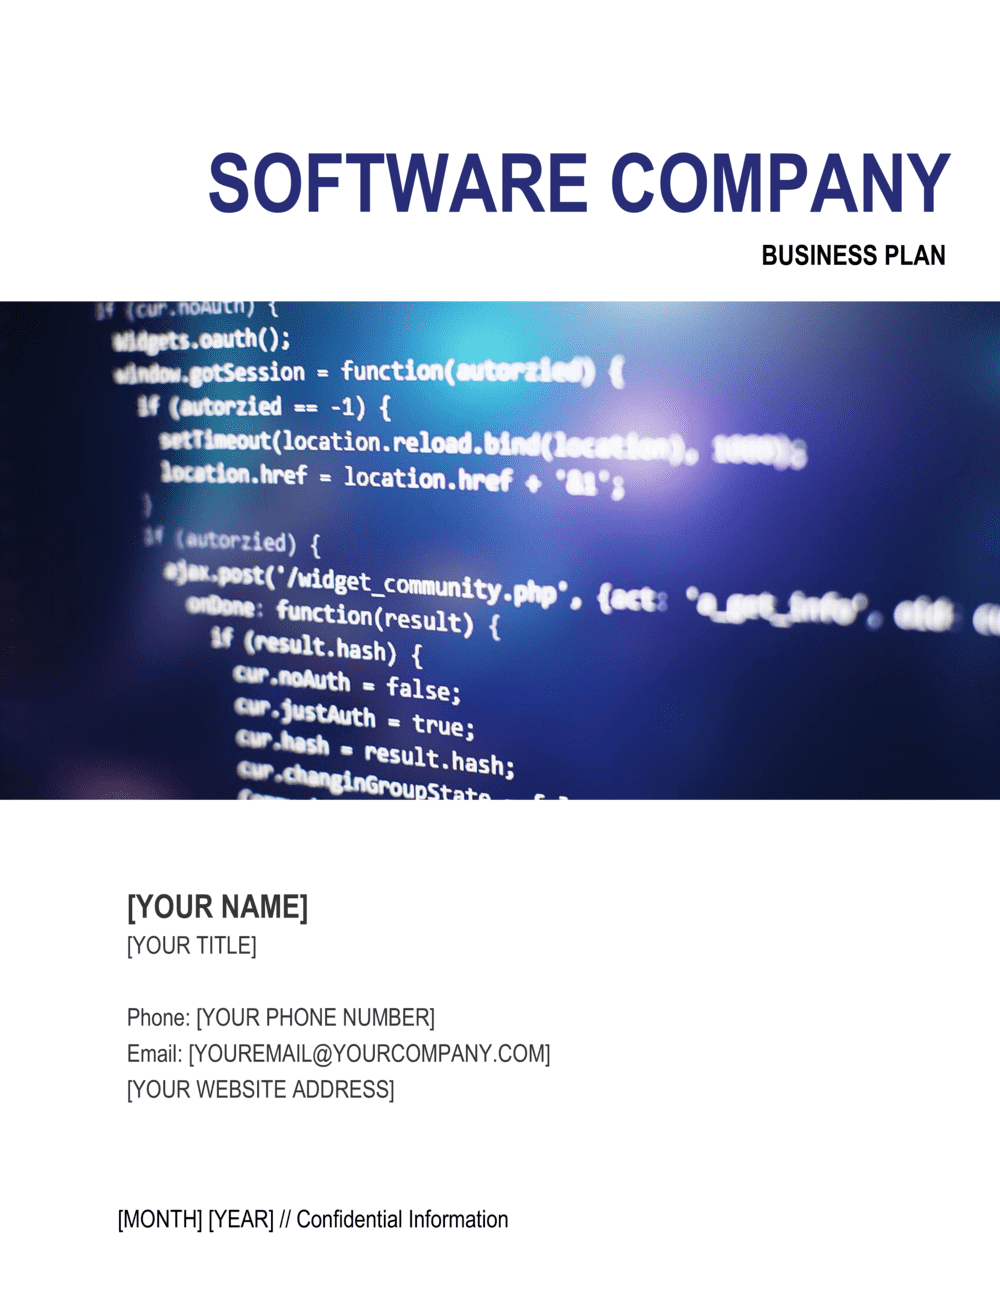 sample business plan for software company